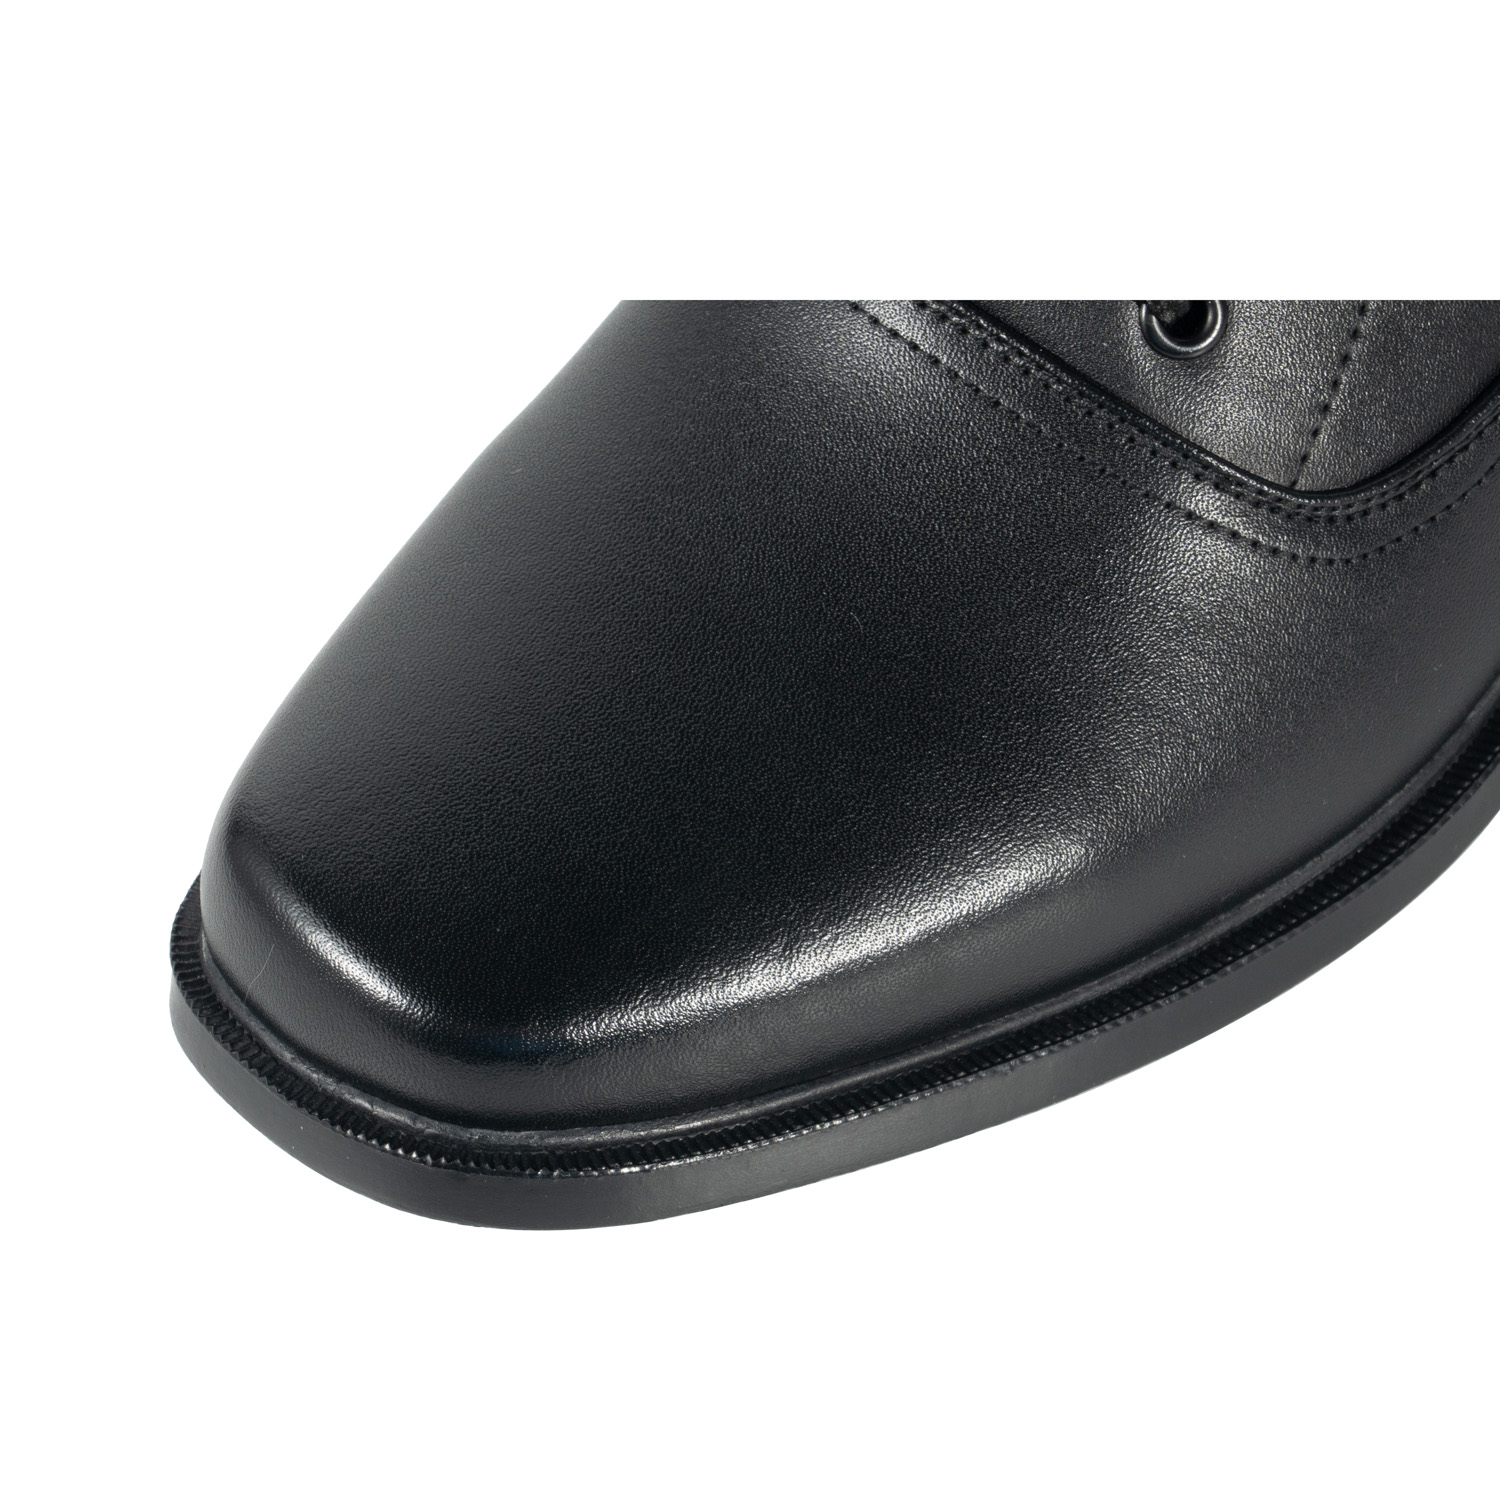 Leather Officer Shoes for Men